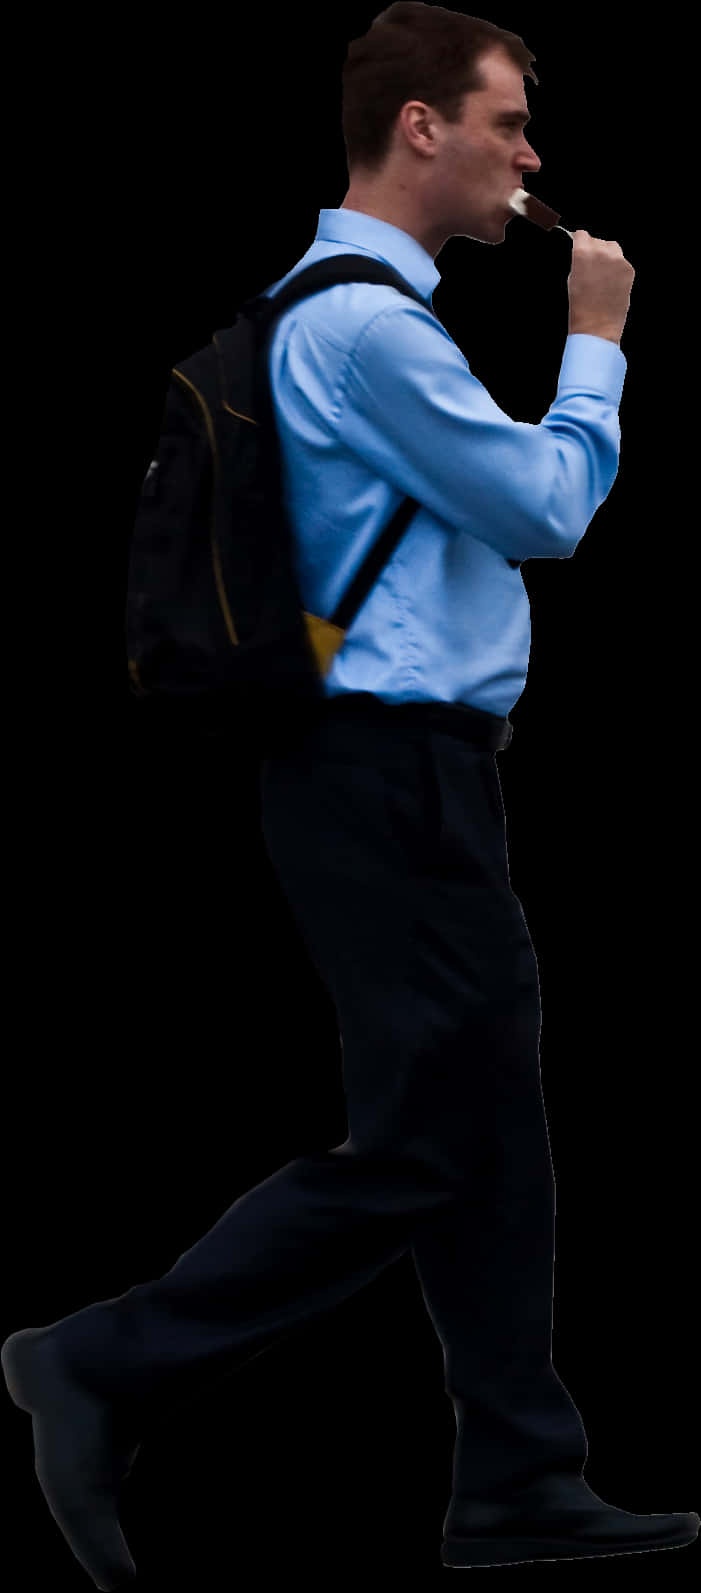 A Man In A Blue Shirt And Black Pants